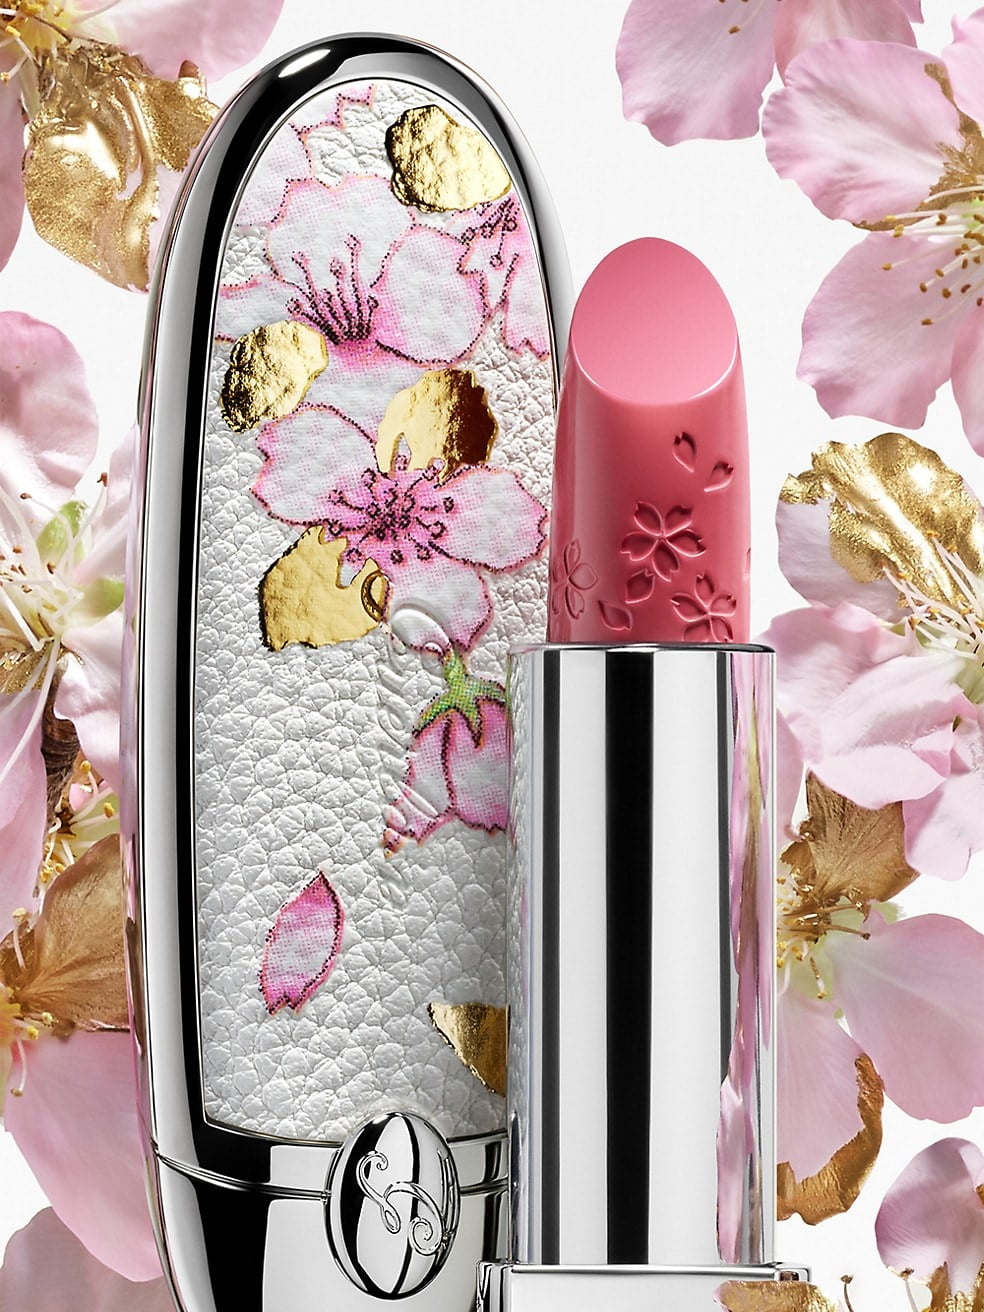 Guerlain Rouge G Customizable Cherry Blossom Lipstick Case from the Lunar New Year Collection